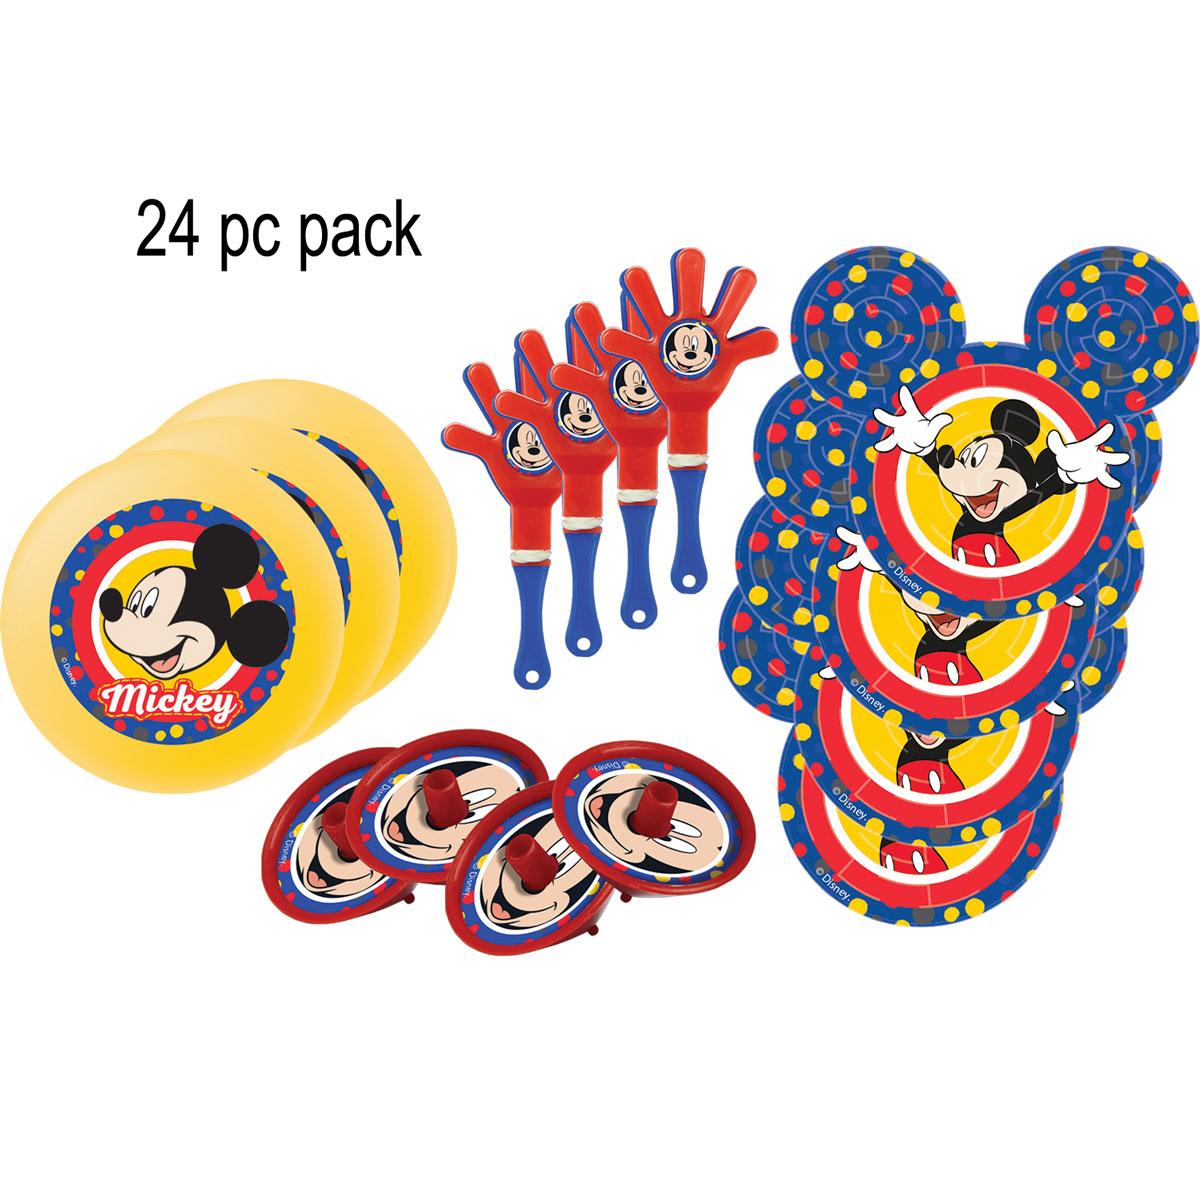 Mickey Mouse Value Favour Pack 24pcs (6ea 4 designs) by Amscan 9903186 available here at Karnival Costumes online party shop